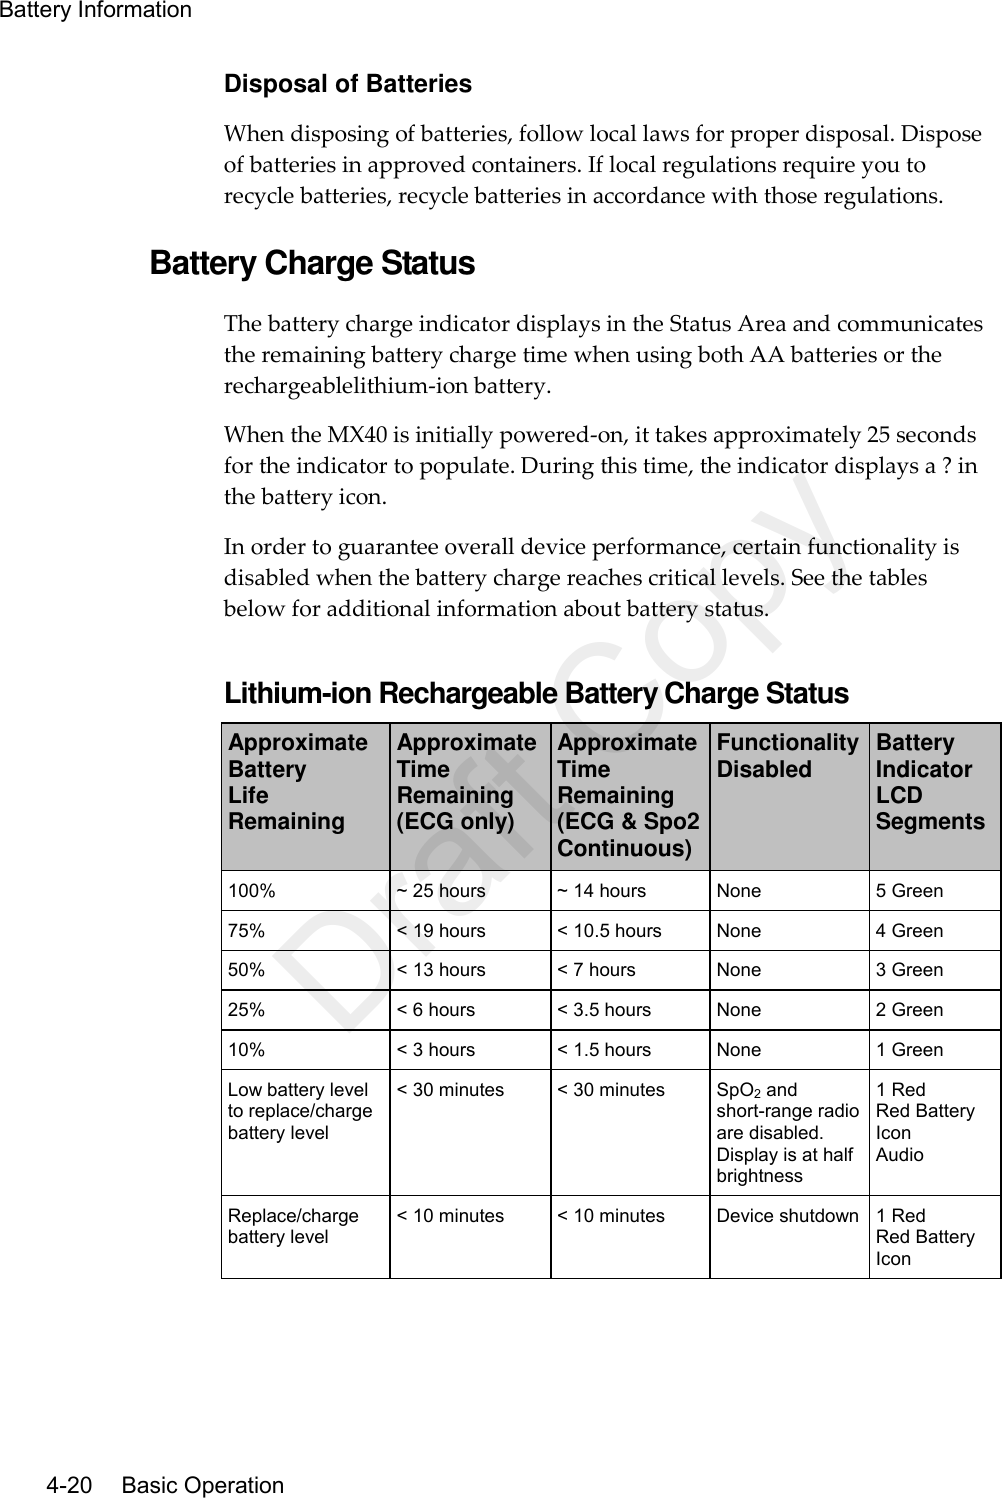 Battery Information   4-20    Basic Operation Disposal of Batteries When disposing of batteries, follow local laws for proper disposal. Dispose of batteries in approved containers. If local regulations require you to recycle batteries, recycle batteries in accordance with those regulations.  Battery Charge Status The battery charge indicator displays in the Status Area and communicates the remaining battery charge time when using both AA batteries or the rechargeablelithium-ion battery.   When the MX40 is initially powered-on, it takes approximately 25 seconds for the indicator to populate. During this time, the indicator displays a ? in the battery icon. In order to guarantee overall device performance, certain functionality is disabled when the battery charge reaches critical levels. See the tables below for additional information about battery status.  Lithium-ion Rechargeable Battery Charge Status Approximate Battery Life Remaining Approximate Time Remaining (ECG only) Approximate Time Remaining (ECG &amp; Spo2 Continuous) Functionality Disabled Battery Indicator LCD Segments 100% ~ 25 hours ~ 14 hours None 5 Green 75% &lt; 19 hours &lt; 10.5 hours None 4 Green 50% &lt; 13 hours &lt; 7 hours None 3 Green 25% &lt; 6 hours &lt; 3.5 hours None 2 Green 10% &lt; 3 hours &lt; 1.5 hours None 1 Green Low battery level to replace/charge battery level &lt; 30 minutes &lt; 30 minutes SpO2 and short-range radio are disabled. Display is at half brightness 1 Red Red Battery Icon Audio Replace/charge battery level &lt; 10 minutes &lt; 10 minutes Device shutdown 1 Red Red Battery Icon   Draft Copy